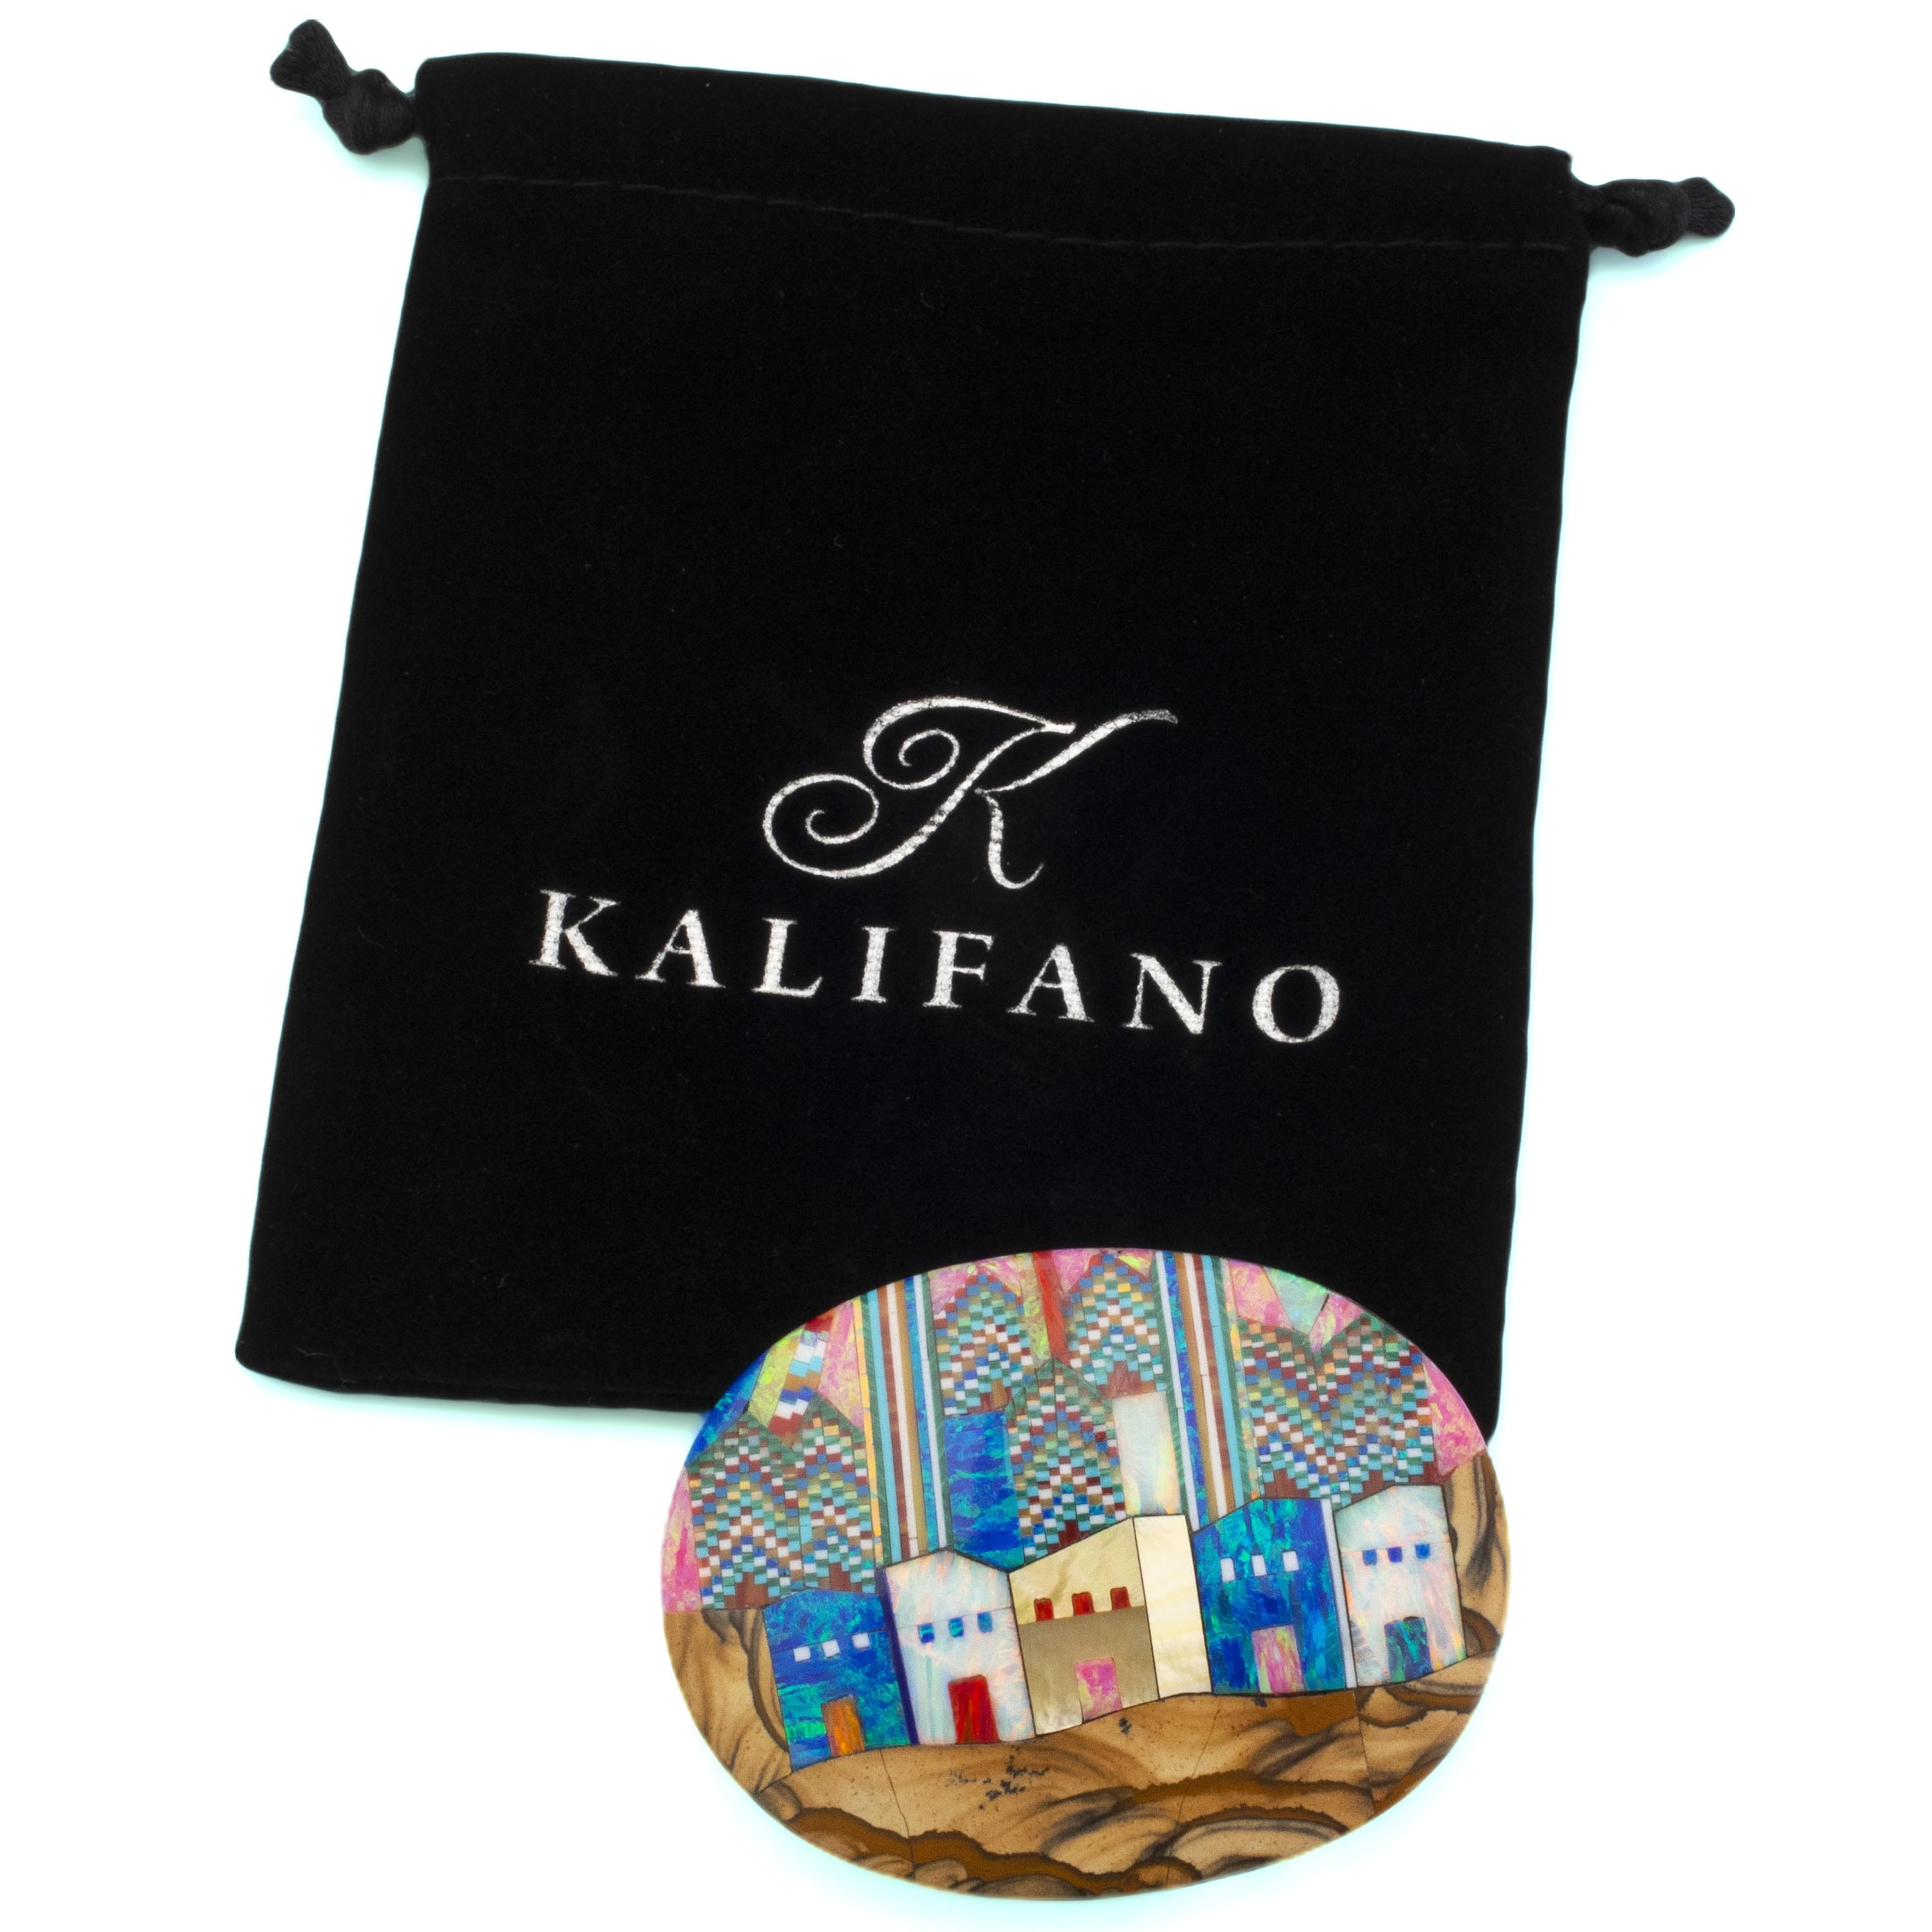 KALIFANO Southwest Silver Jewelry Multi Gem Opal Micro Inlay with Genuine Turquoise Handmade 925 Sterling Silver Oval Belt Buckle AKBB1200.003